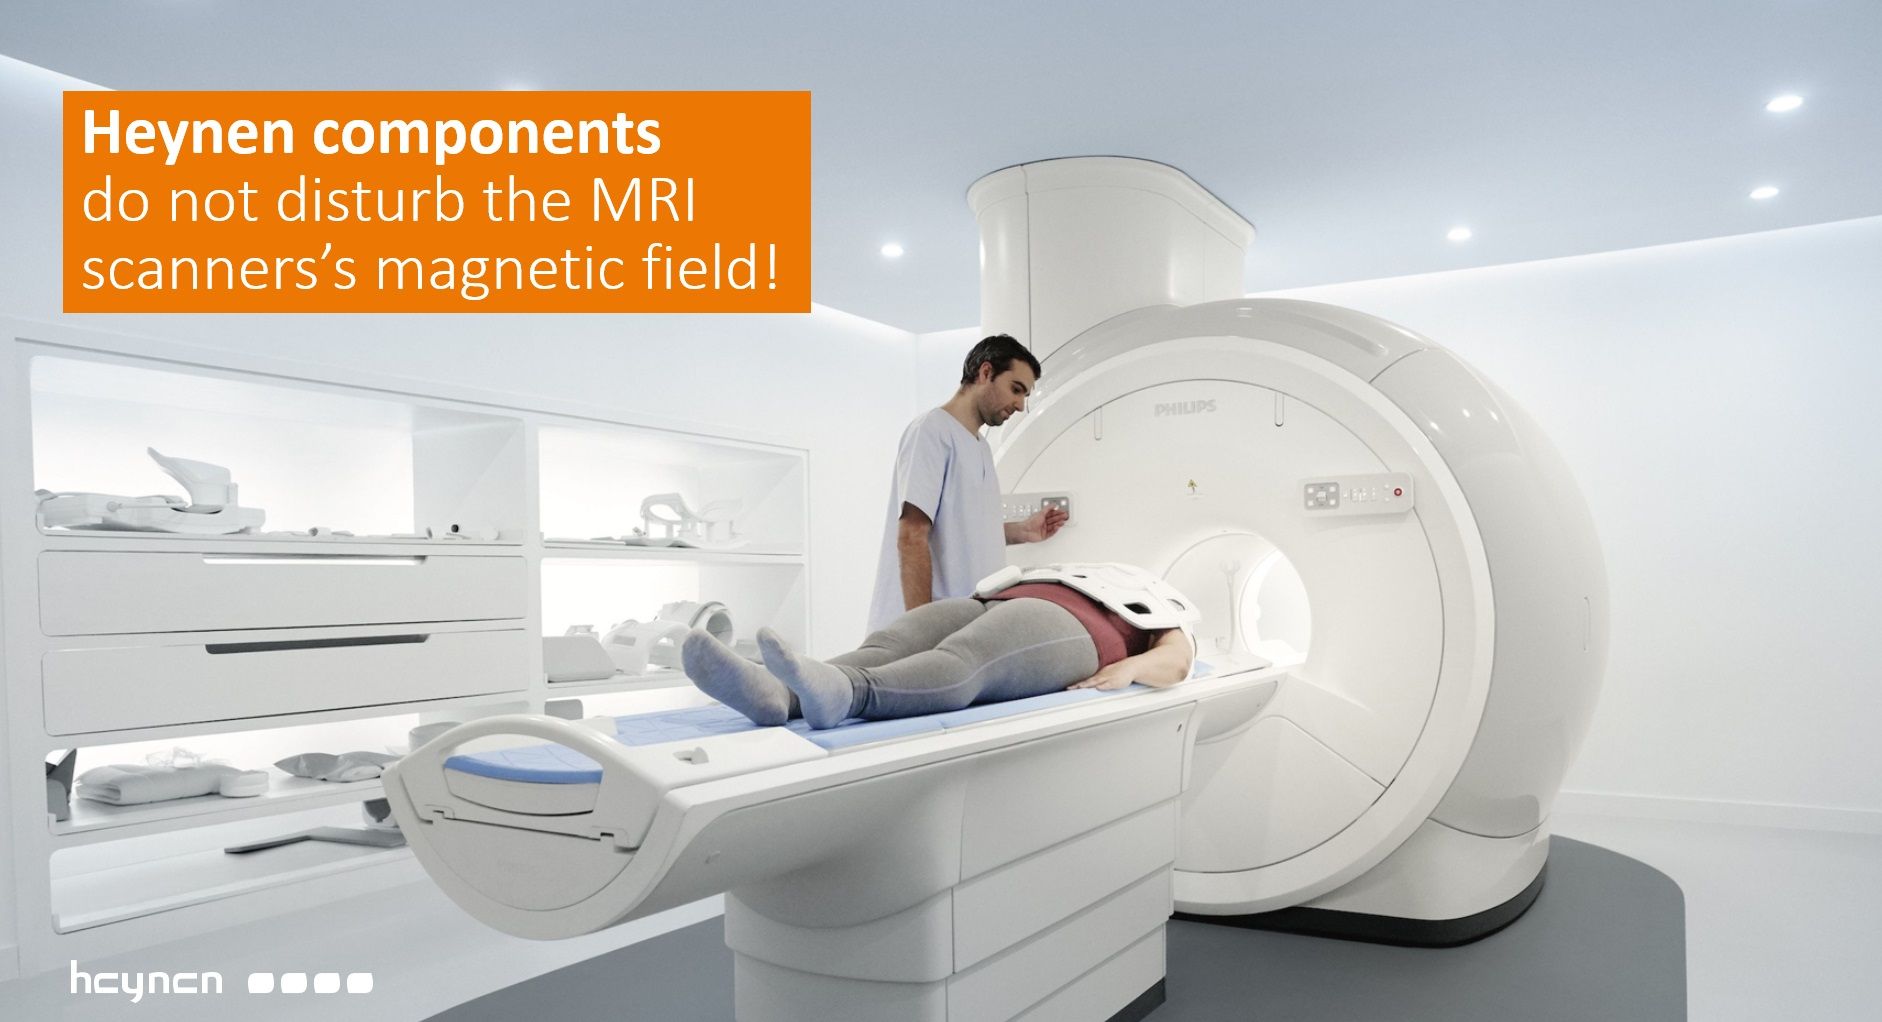 Heynen components do not disturb the MRI scanners's magnetic field!